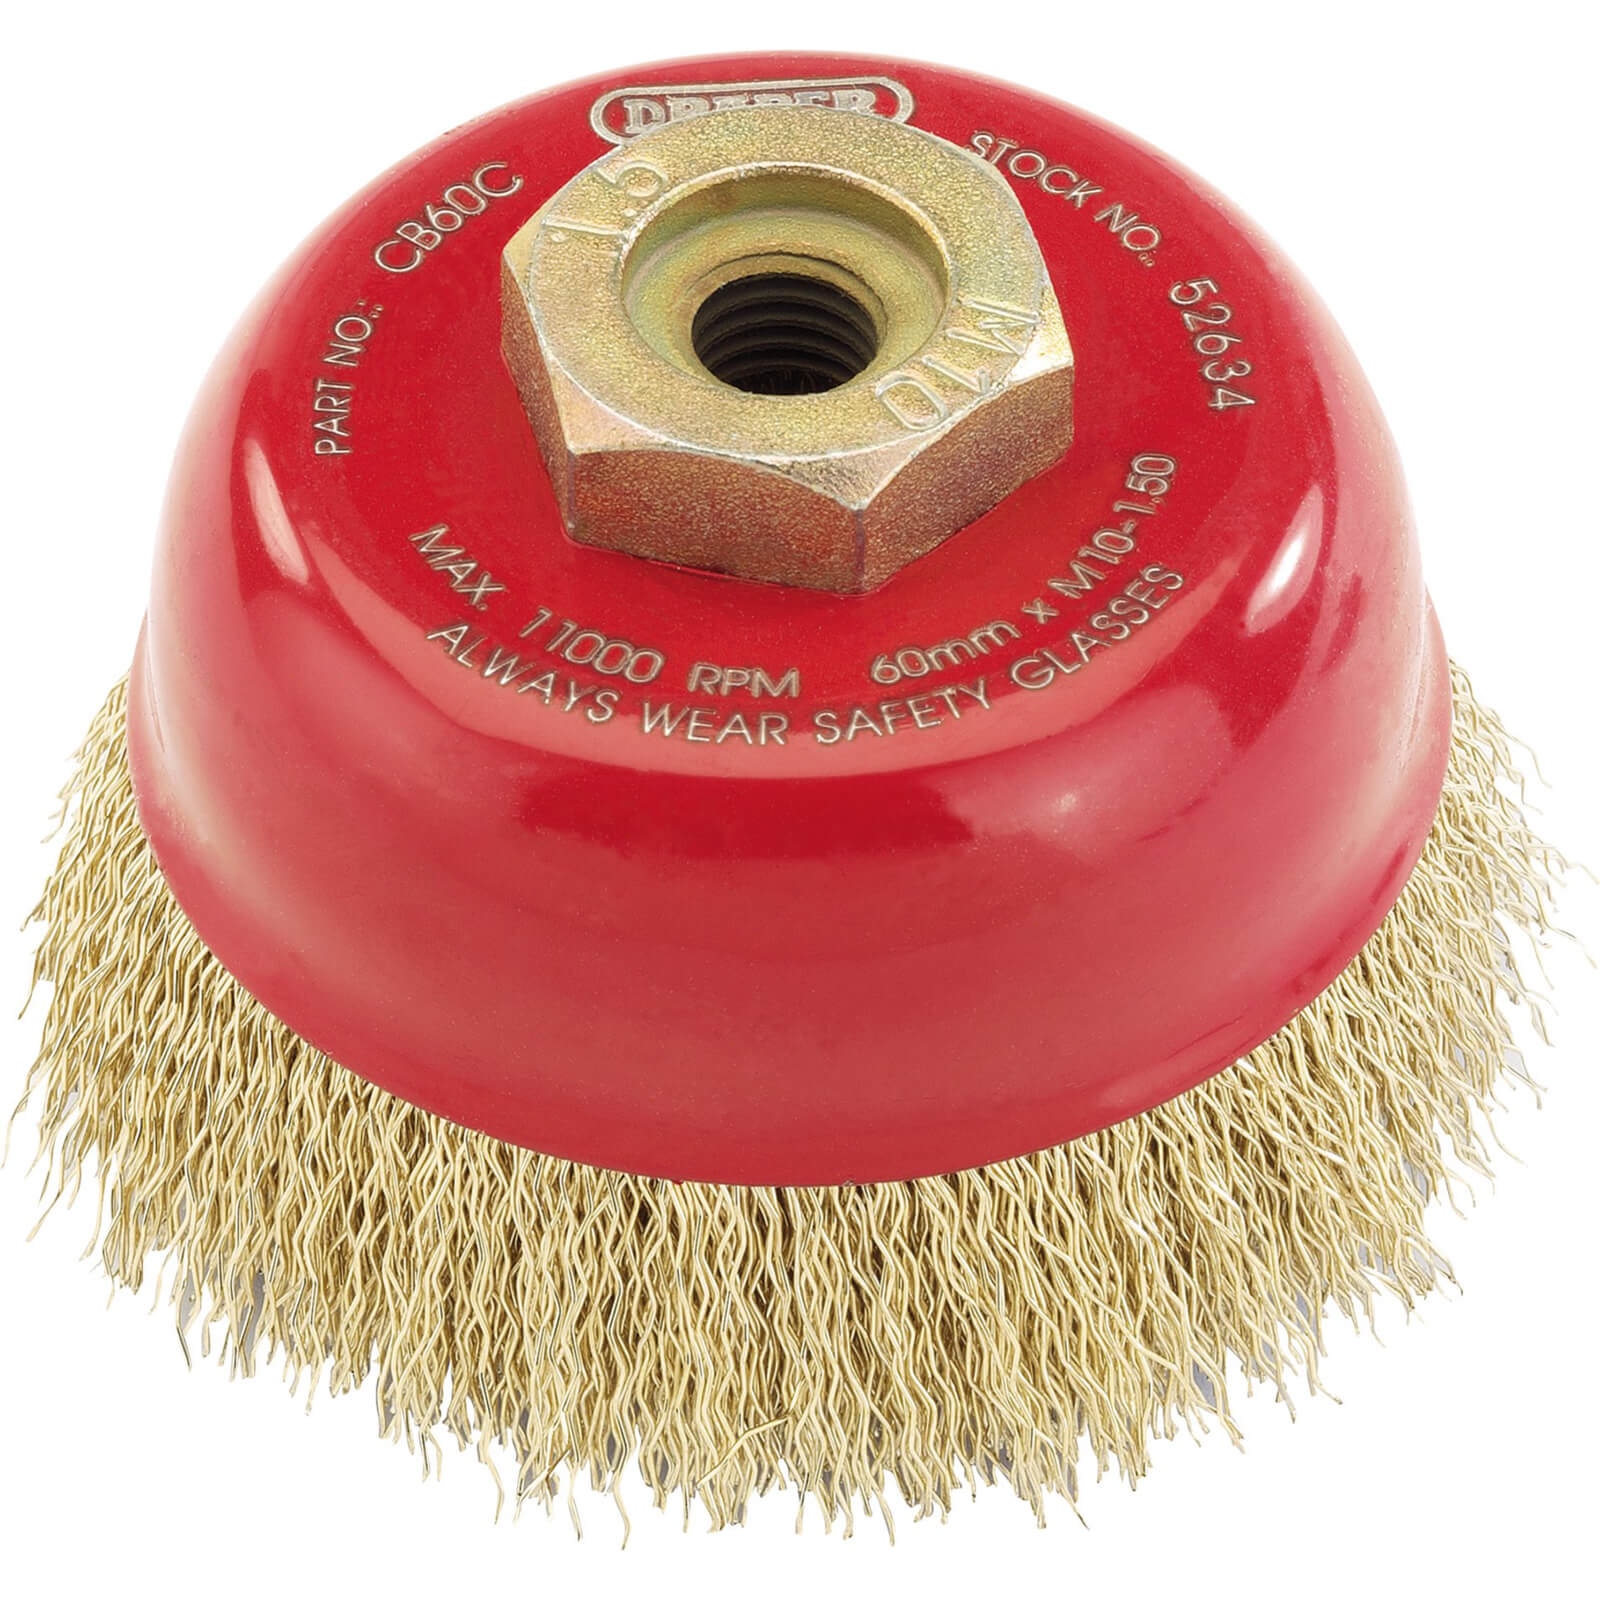 Image of Draper Expert Brassed Steel Wire Cup Brush 60mm M10 x 1.5 Thread